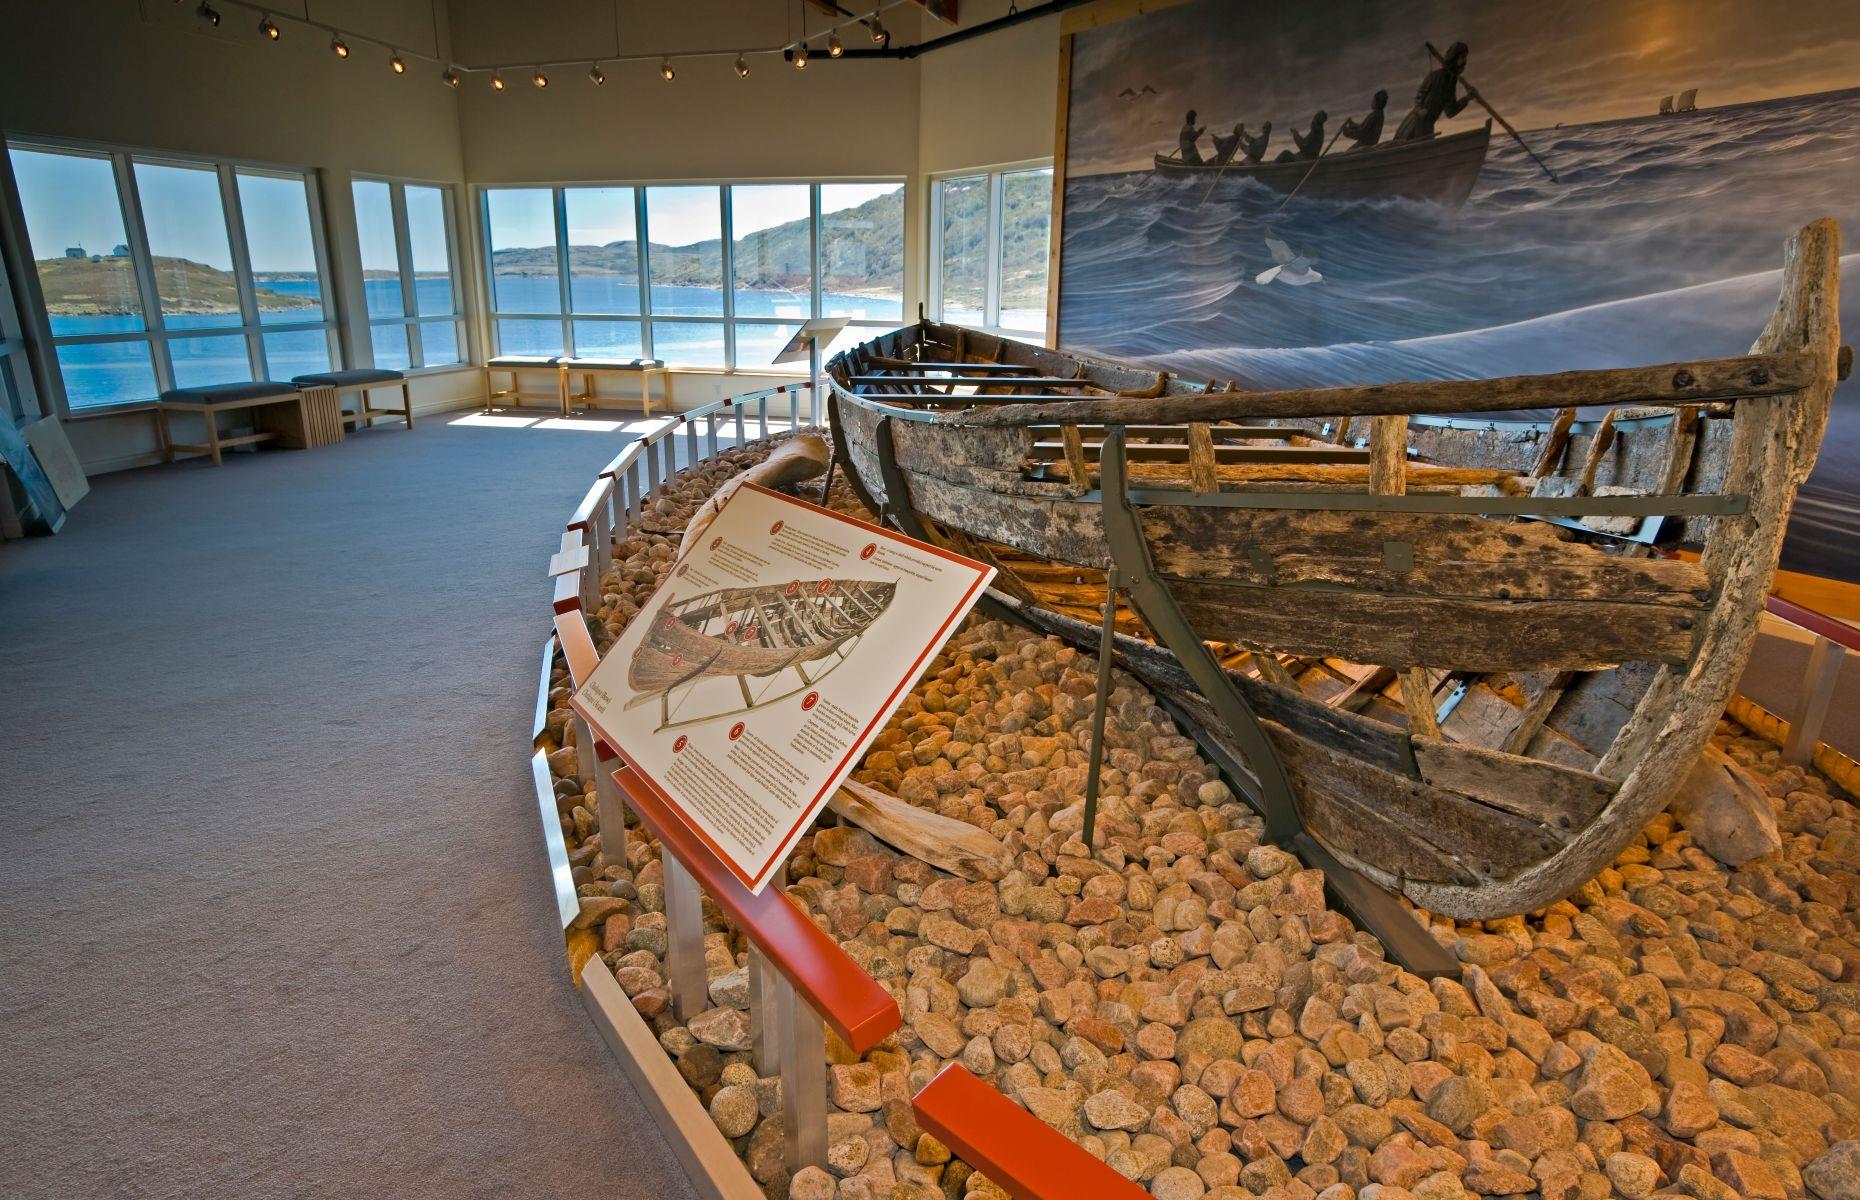 <p>Spanish and French pioneers on the Newfoundland coast discovered that its waters were thick with whales, and established a port at Red Bay to handle carcasses and process valuable whale oil. The gruesome trade has now been consigned to history, but the modern village has a whaling museum that includes a surprisingly small chalupa that's North America's oldest known whaling boat. The vessel spent 400 years at the bottom of Red Bay before it was recovered by maritime archaeologists, and is dwarfed by whale bones elsewhere in the museum.</p>